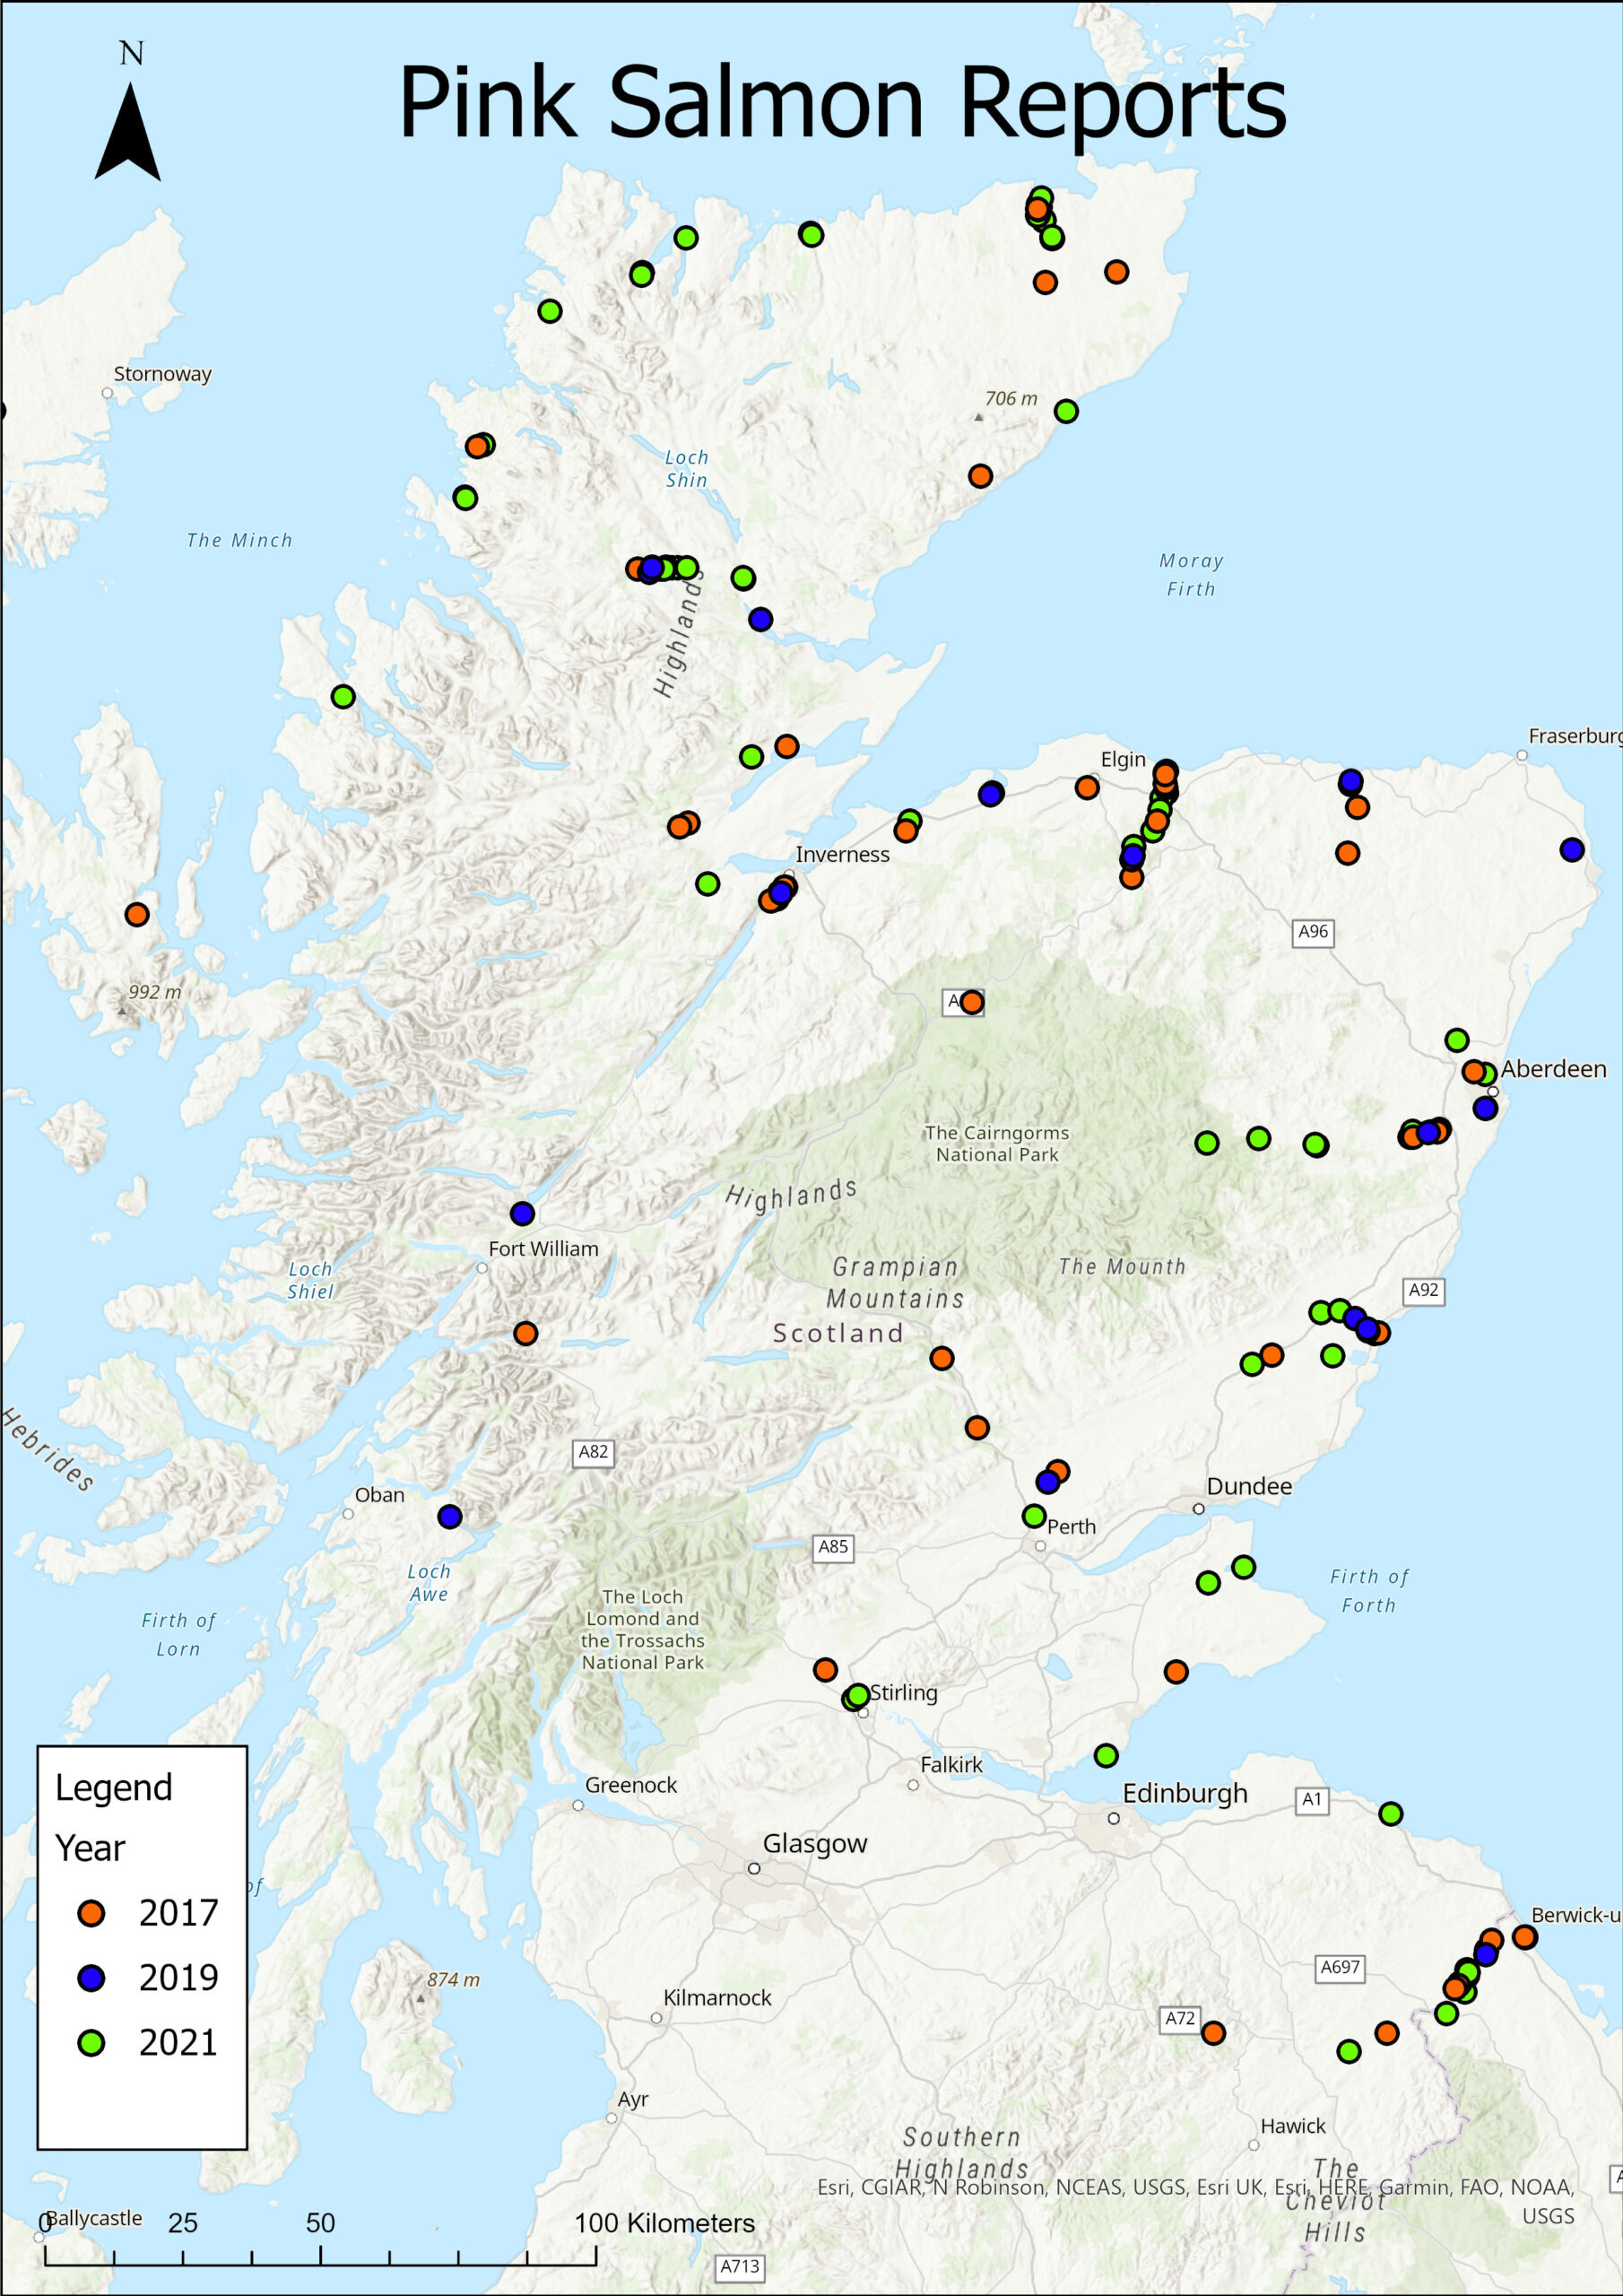 Map showing where pink salmon have been reported. Supplied by Fisheries Management Scotland (FMS)